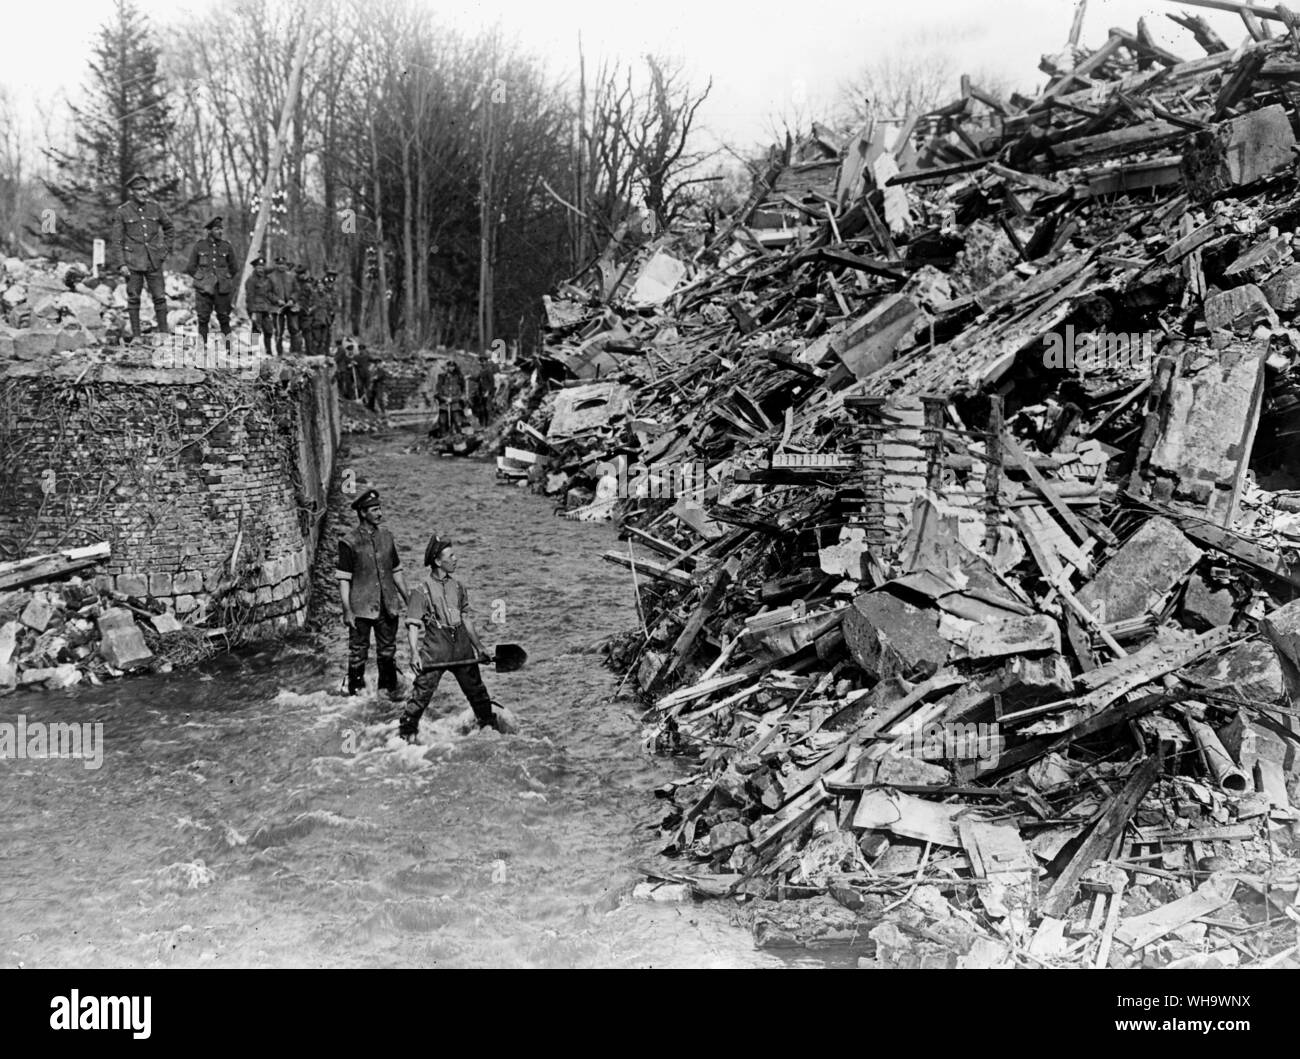 WW1: Mopping up after the German's retreat. War debris. Stock Photo